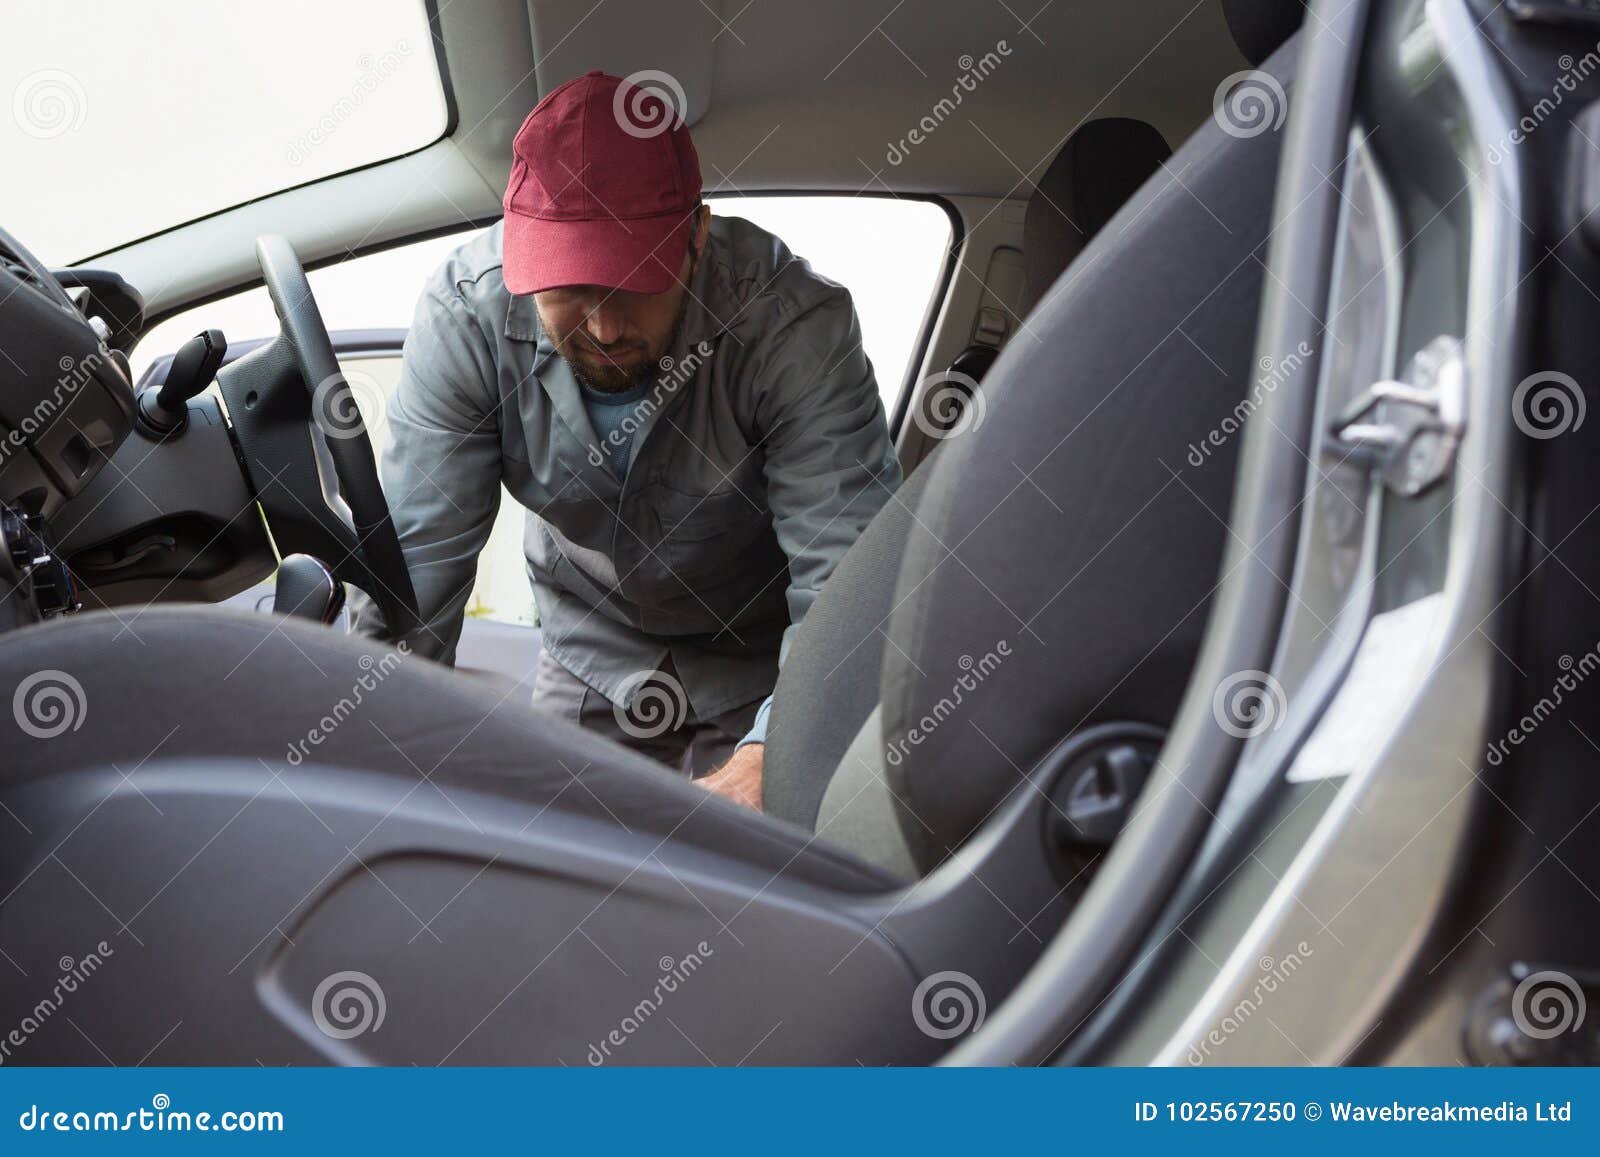 Auto Service Staff Cleaning Car Interior Stock Photo Image